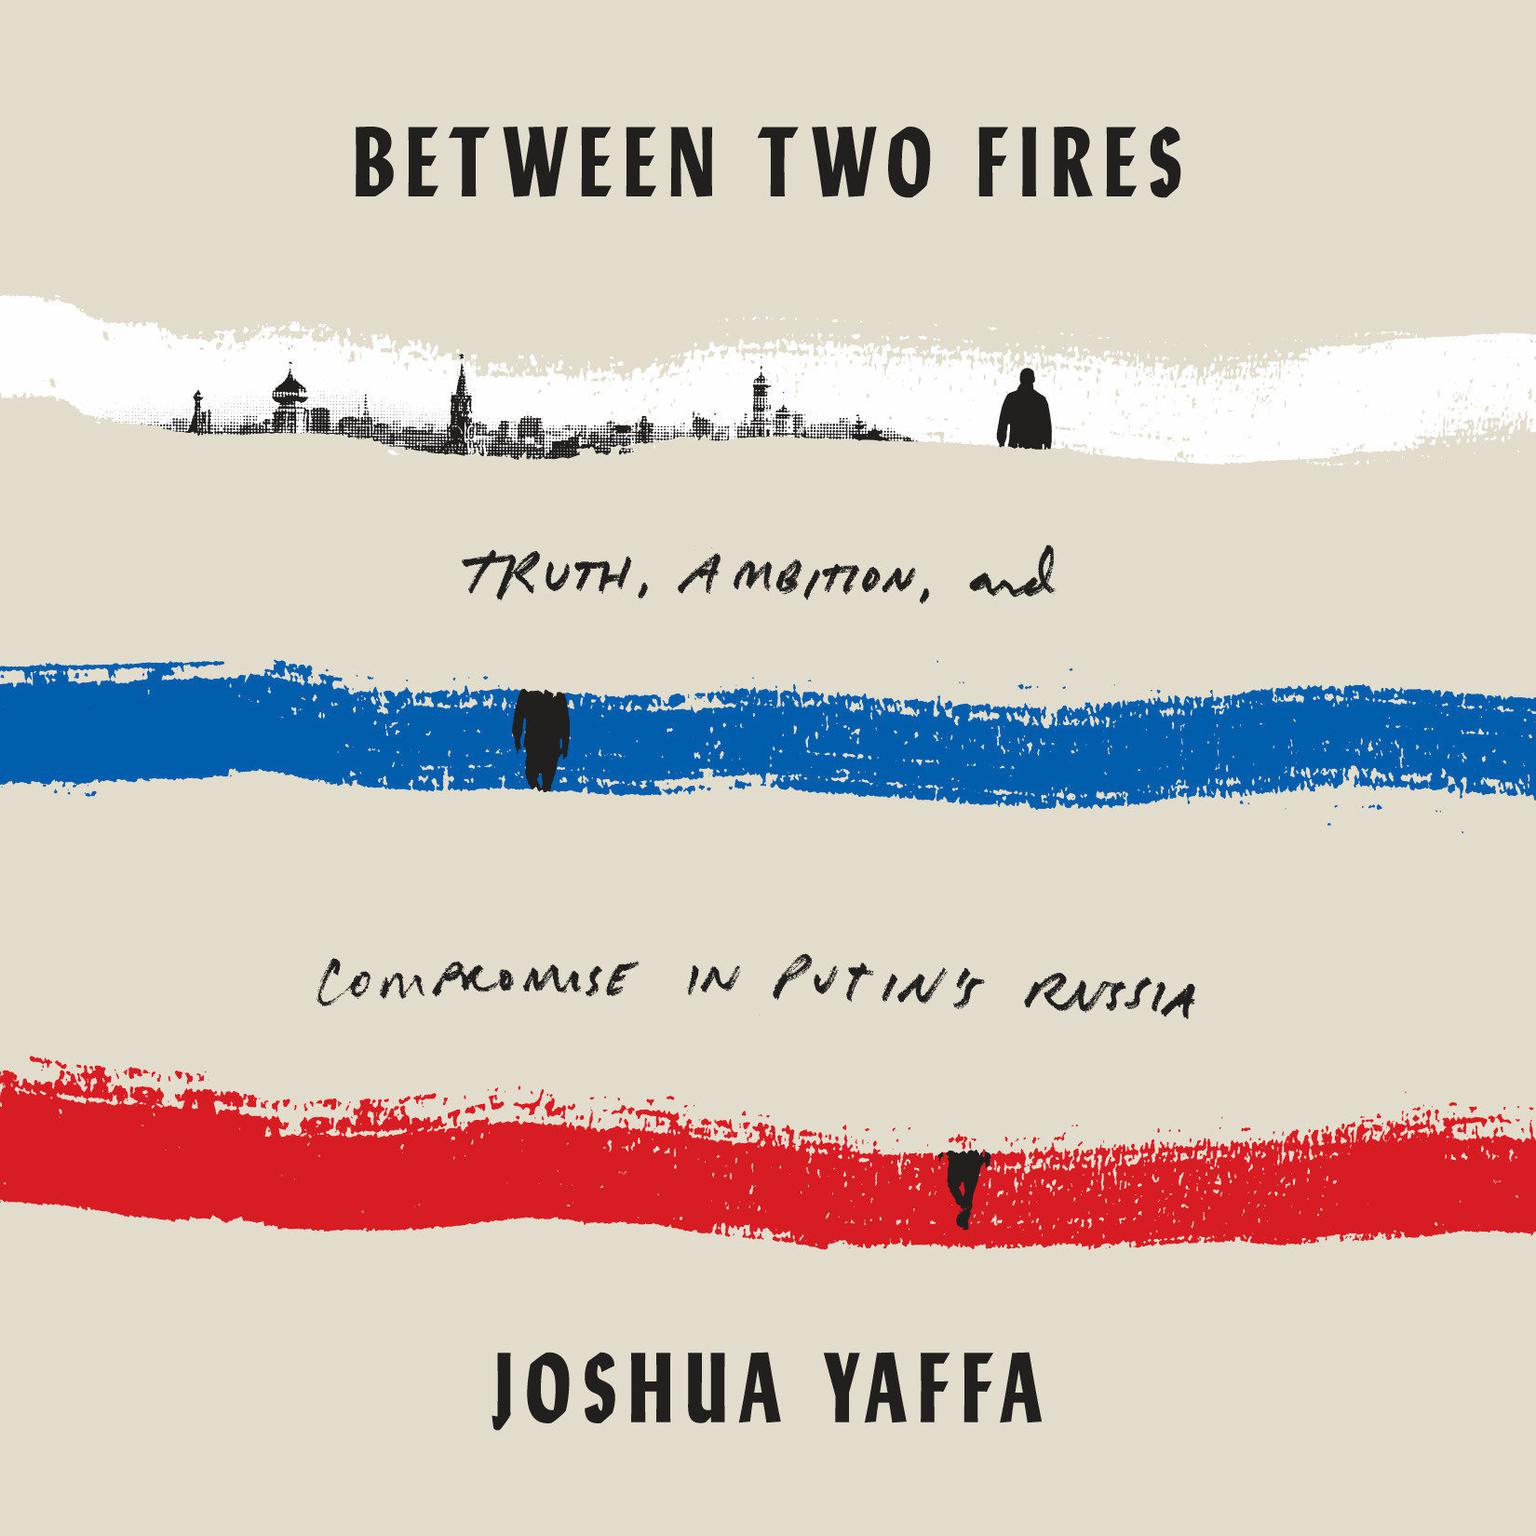 Between Two Fires: Truth, Ambition, and Compromise in Putins Russia Audiobook, by Joshua Yaffa